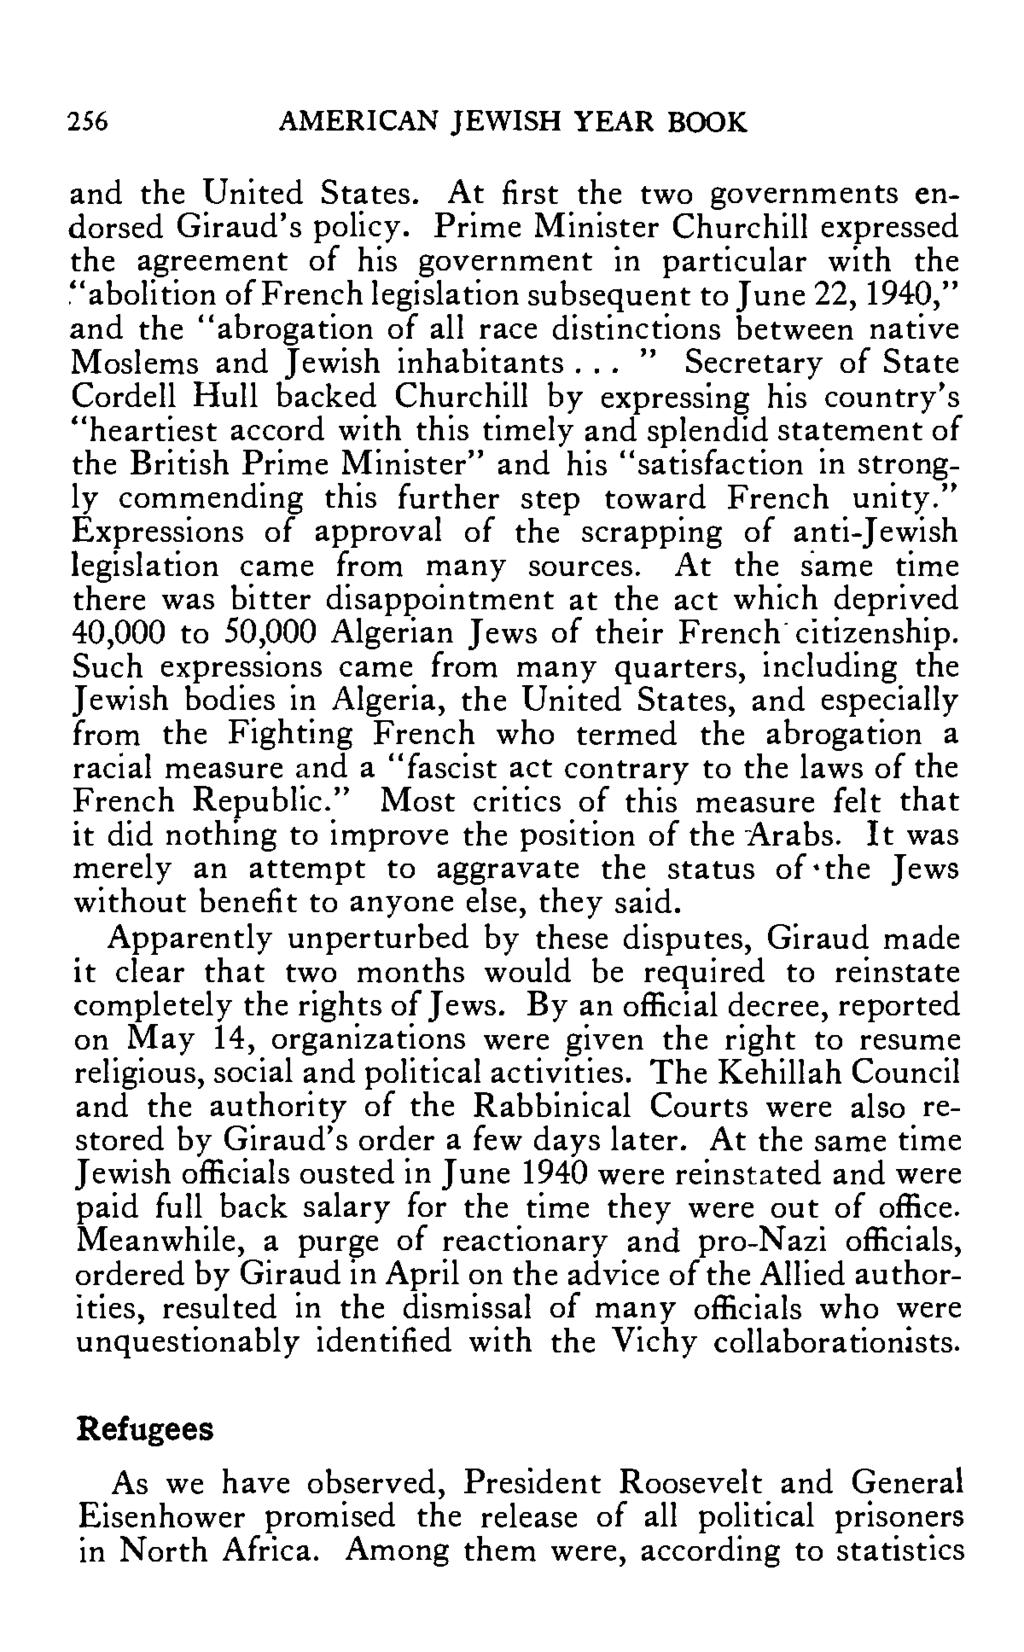 256 AMERICAN JEWISH YEAR BOOK and the United States. At first the two governments endorsed Giraud's policy.